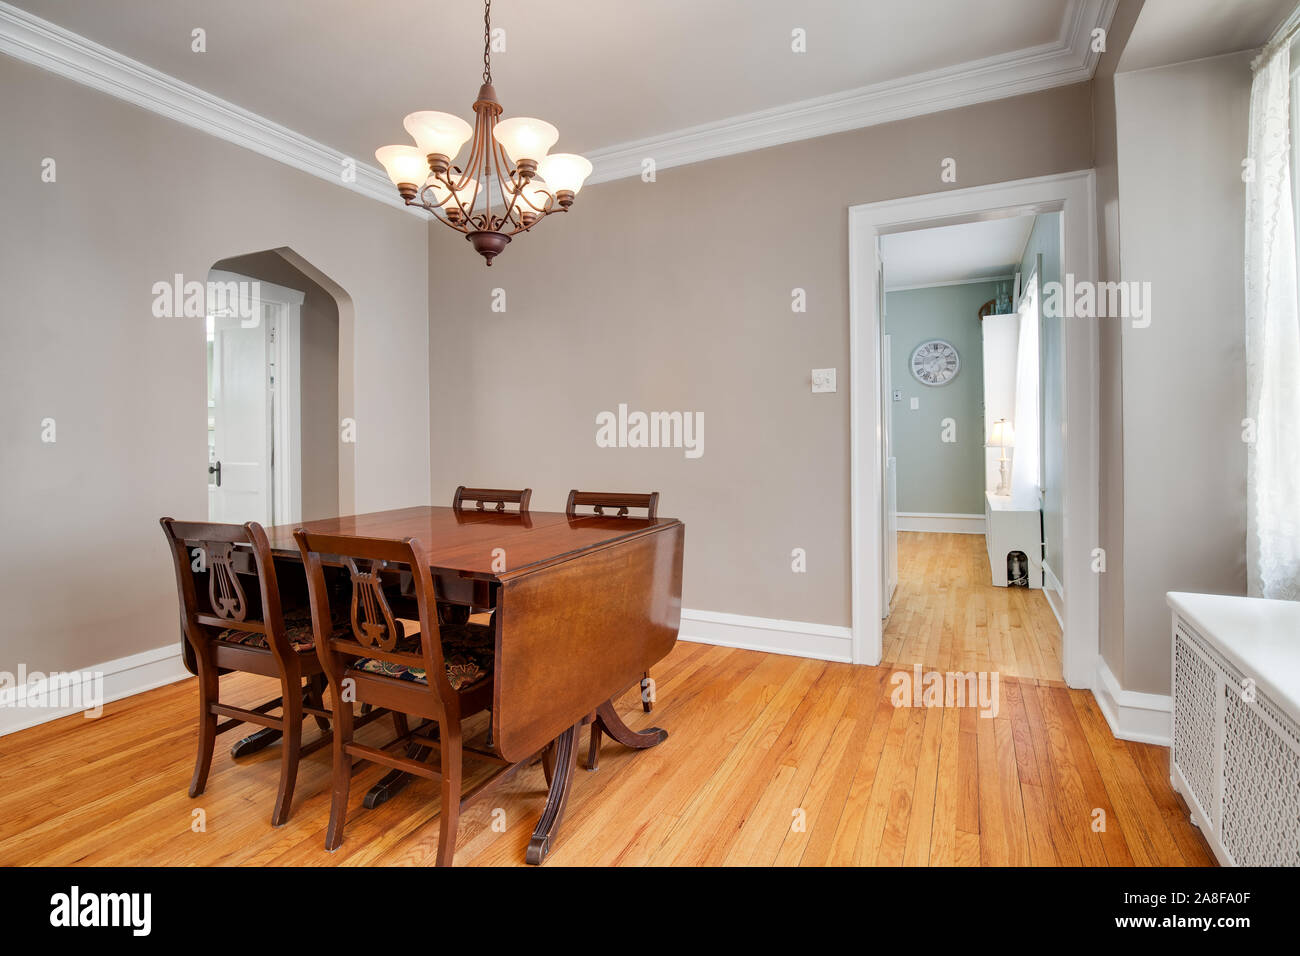 An old plain dining room with a table and chandelier hanging from above. Doorways lead to attached rooms with hardwood floor. Stock Photo